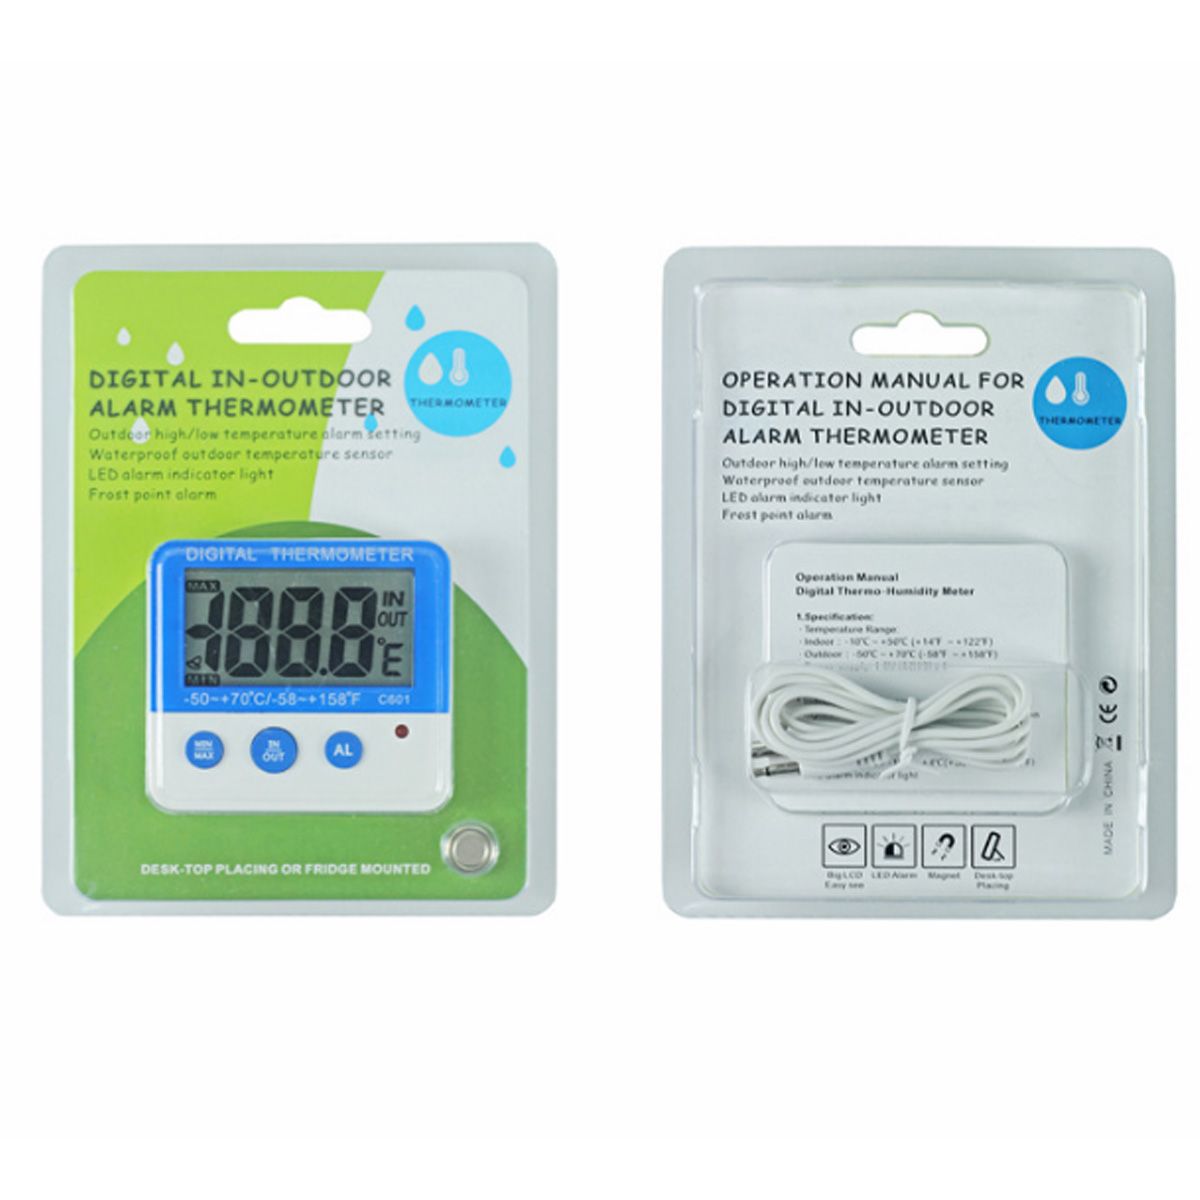 Household-Indoor-And-Outdoor-Digital-Thermometers-Home-Refrigerator-Pet-Electronic-Thermometer-Frost-1567932